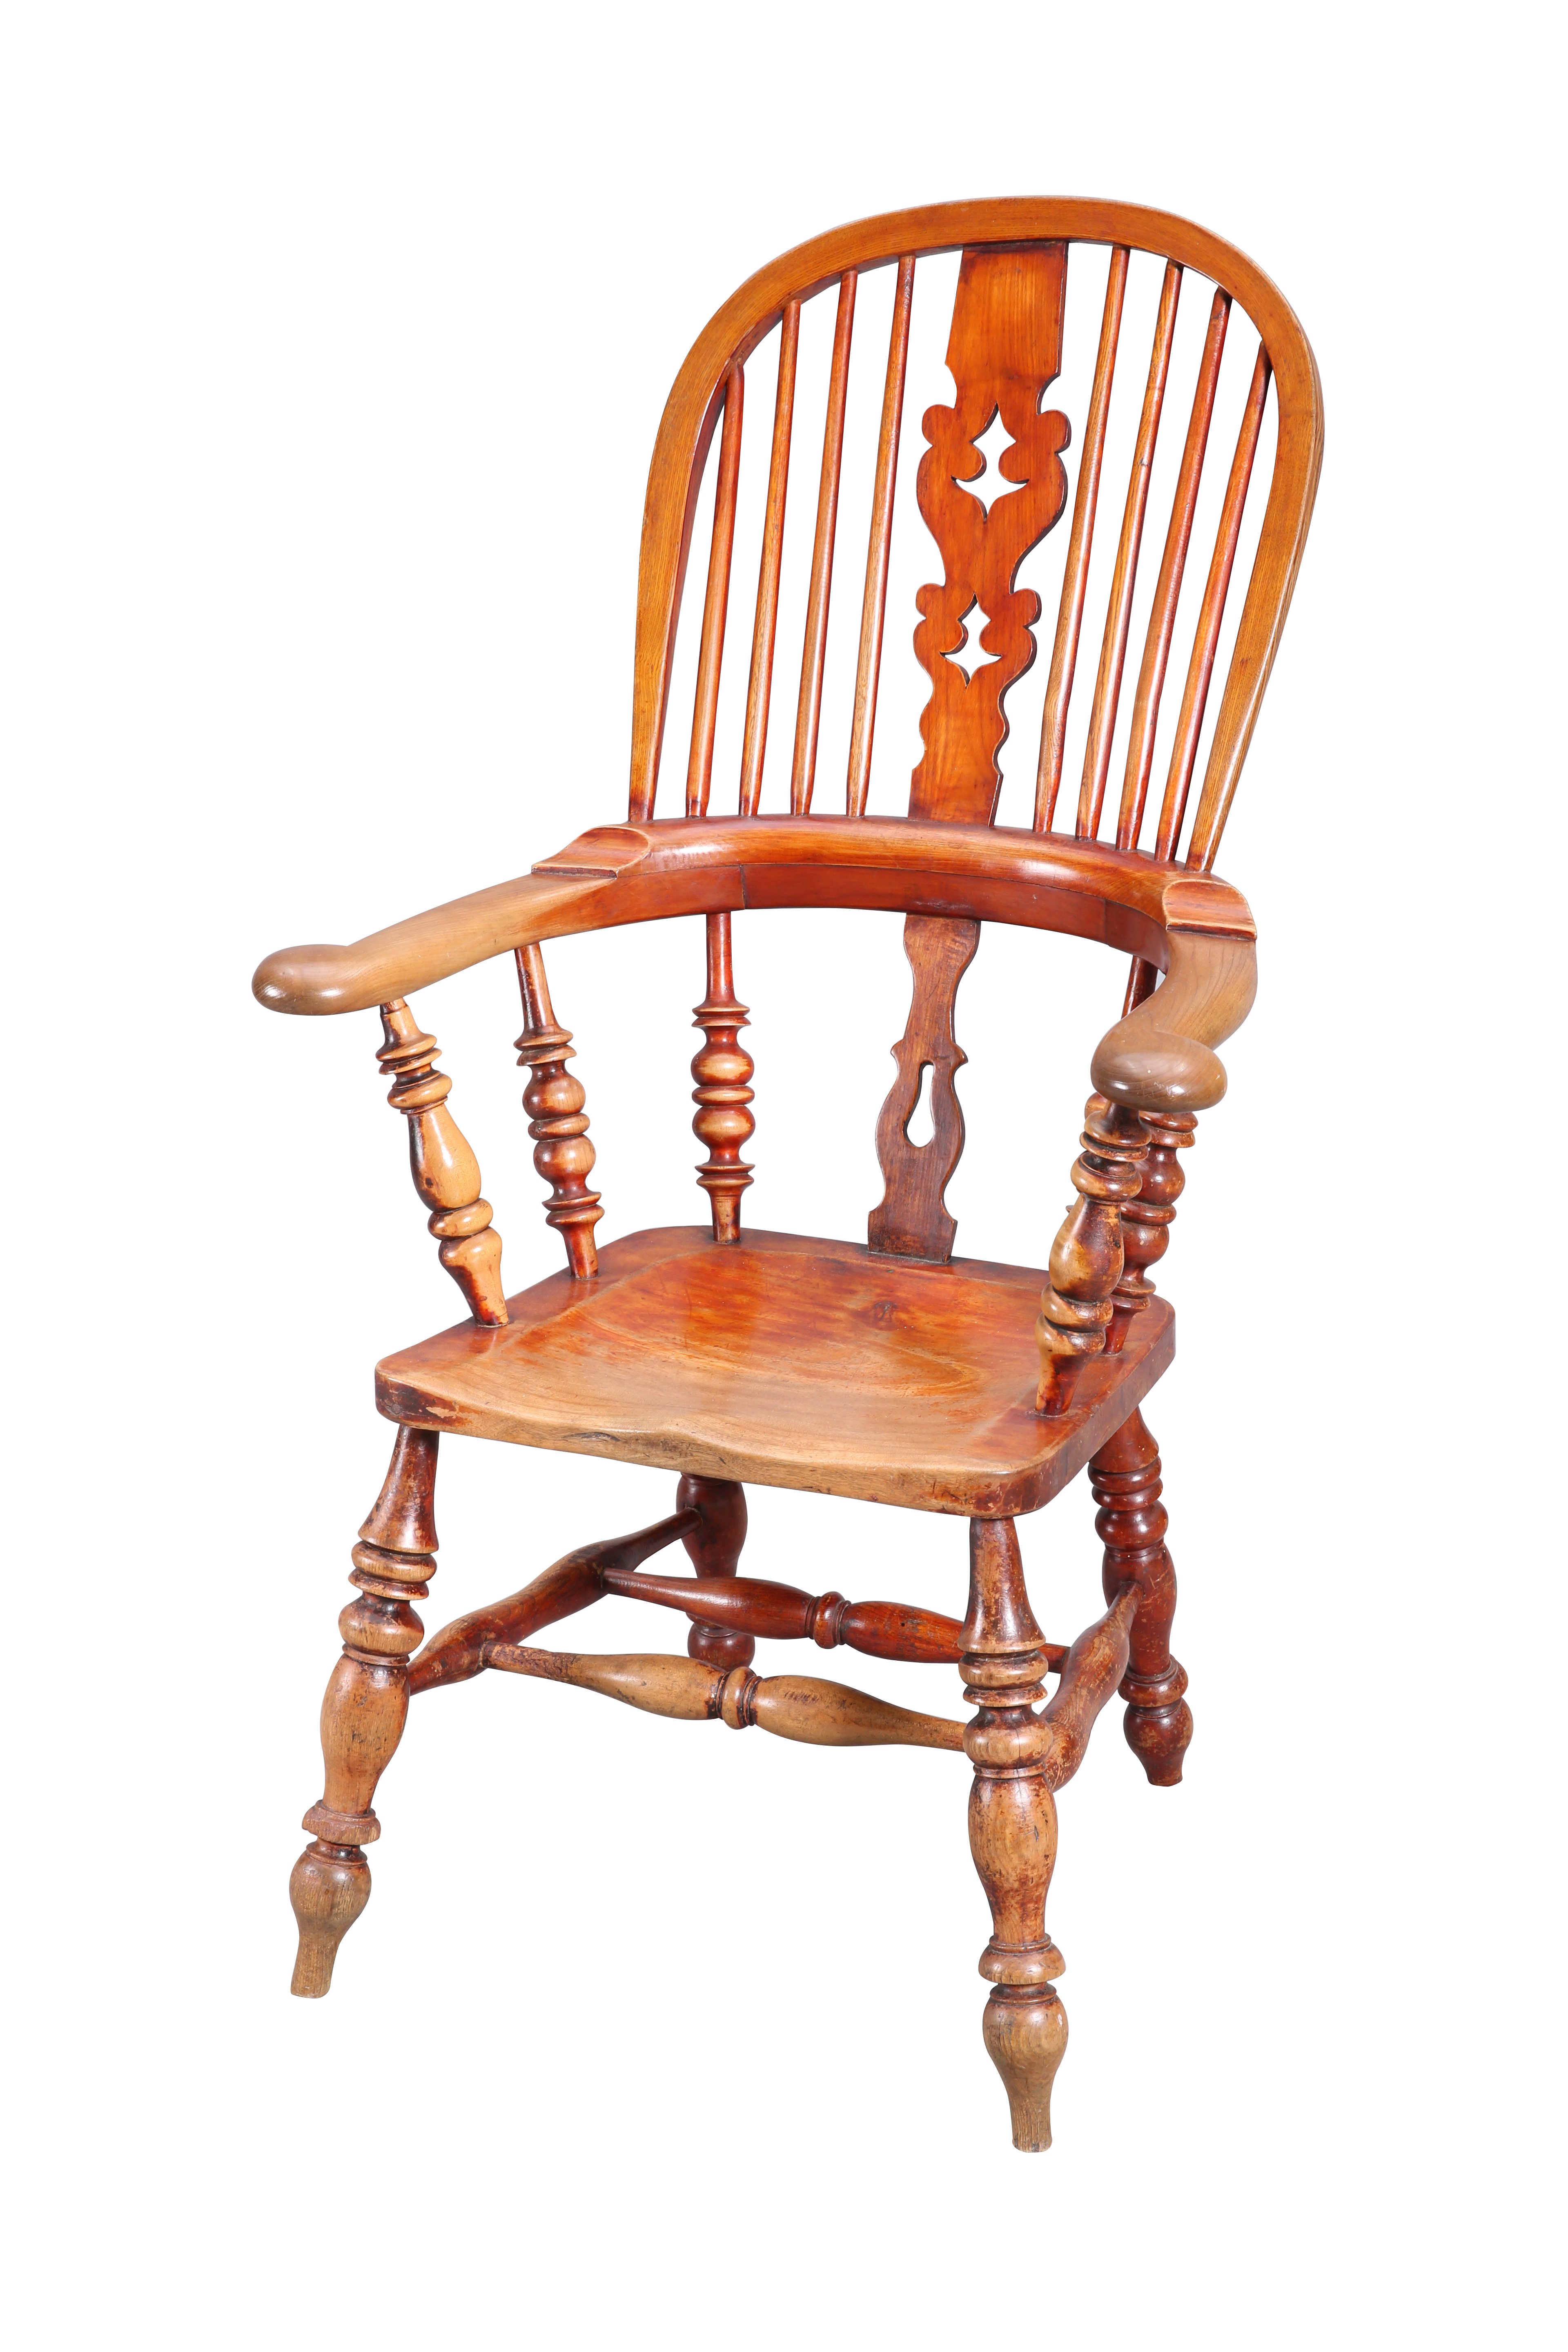 A MID 19TH CENTURY ASH AND ELM BROAD-ARM WINDSOR CHAIR